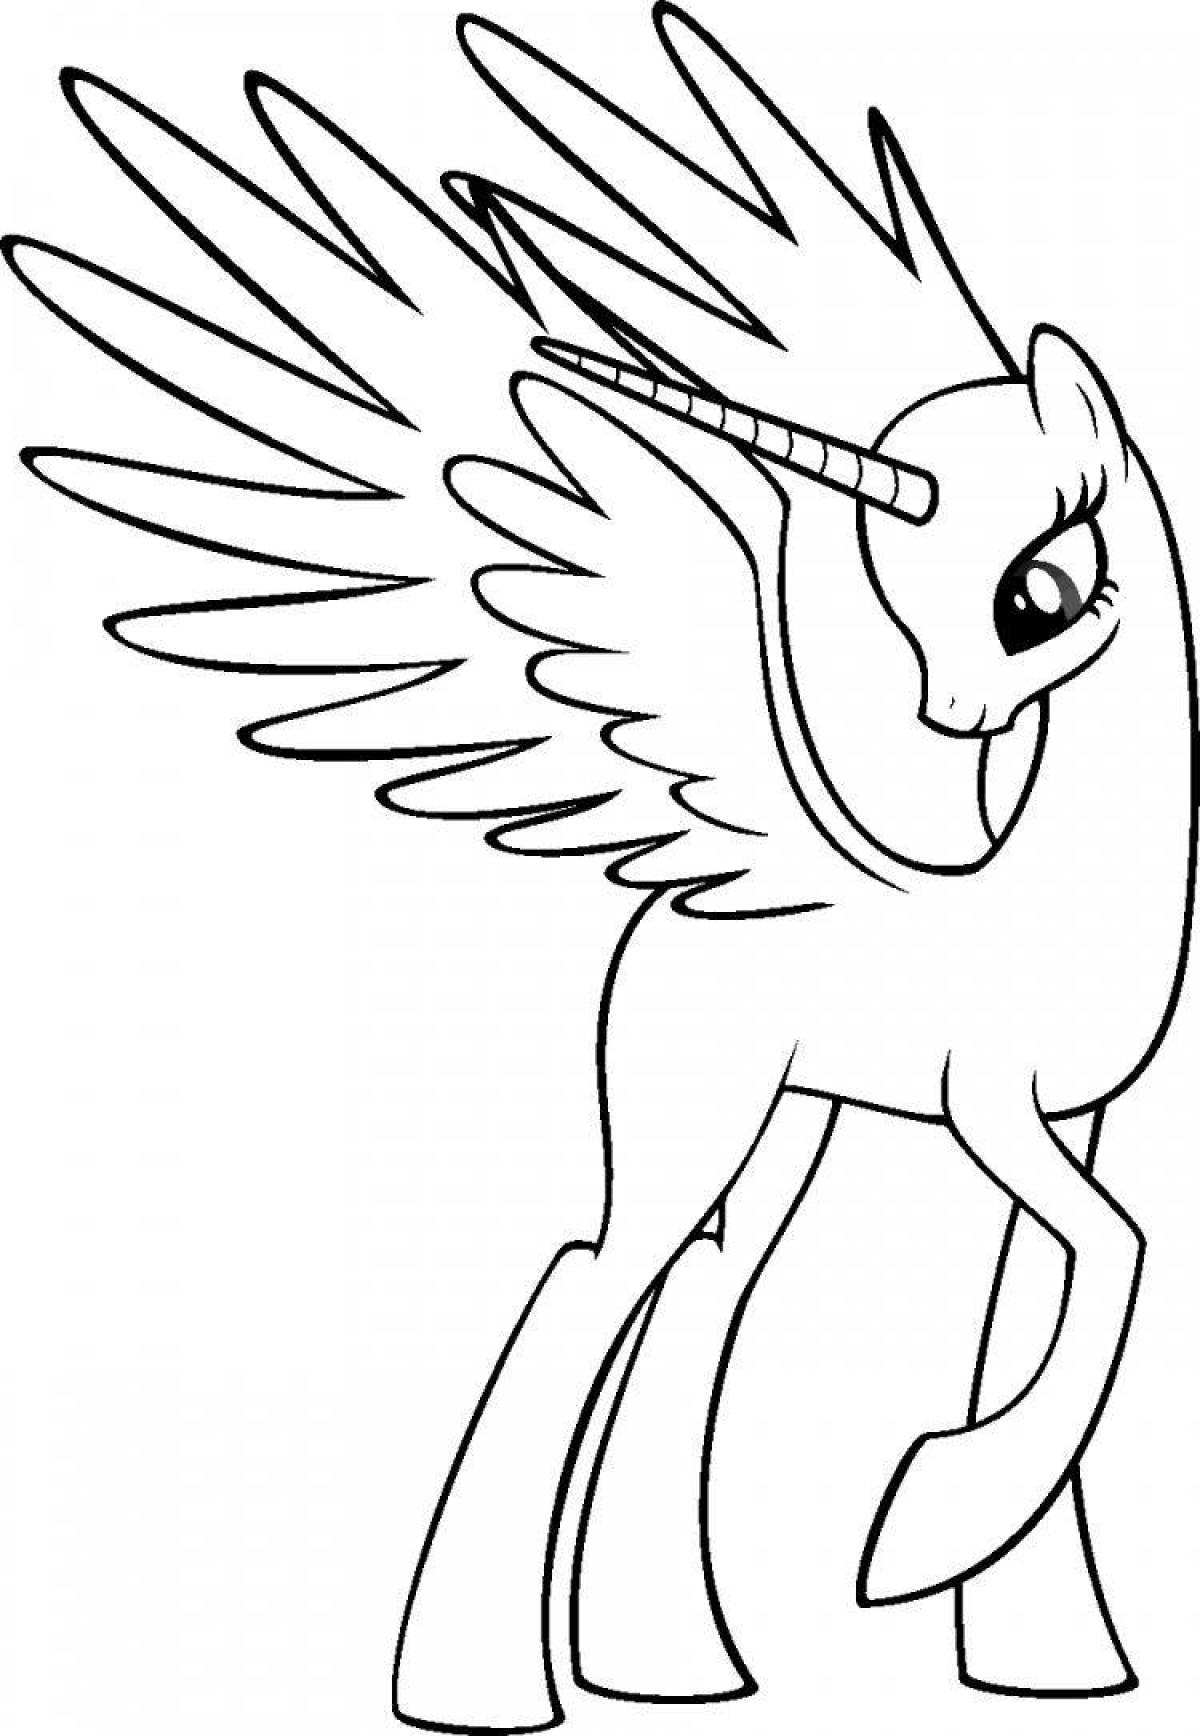 Coloring page peaceful alicorn